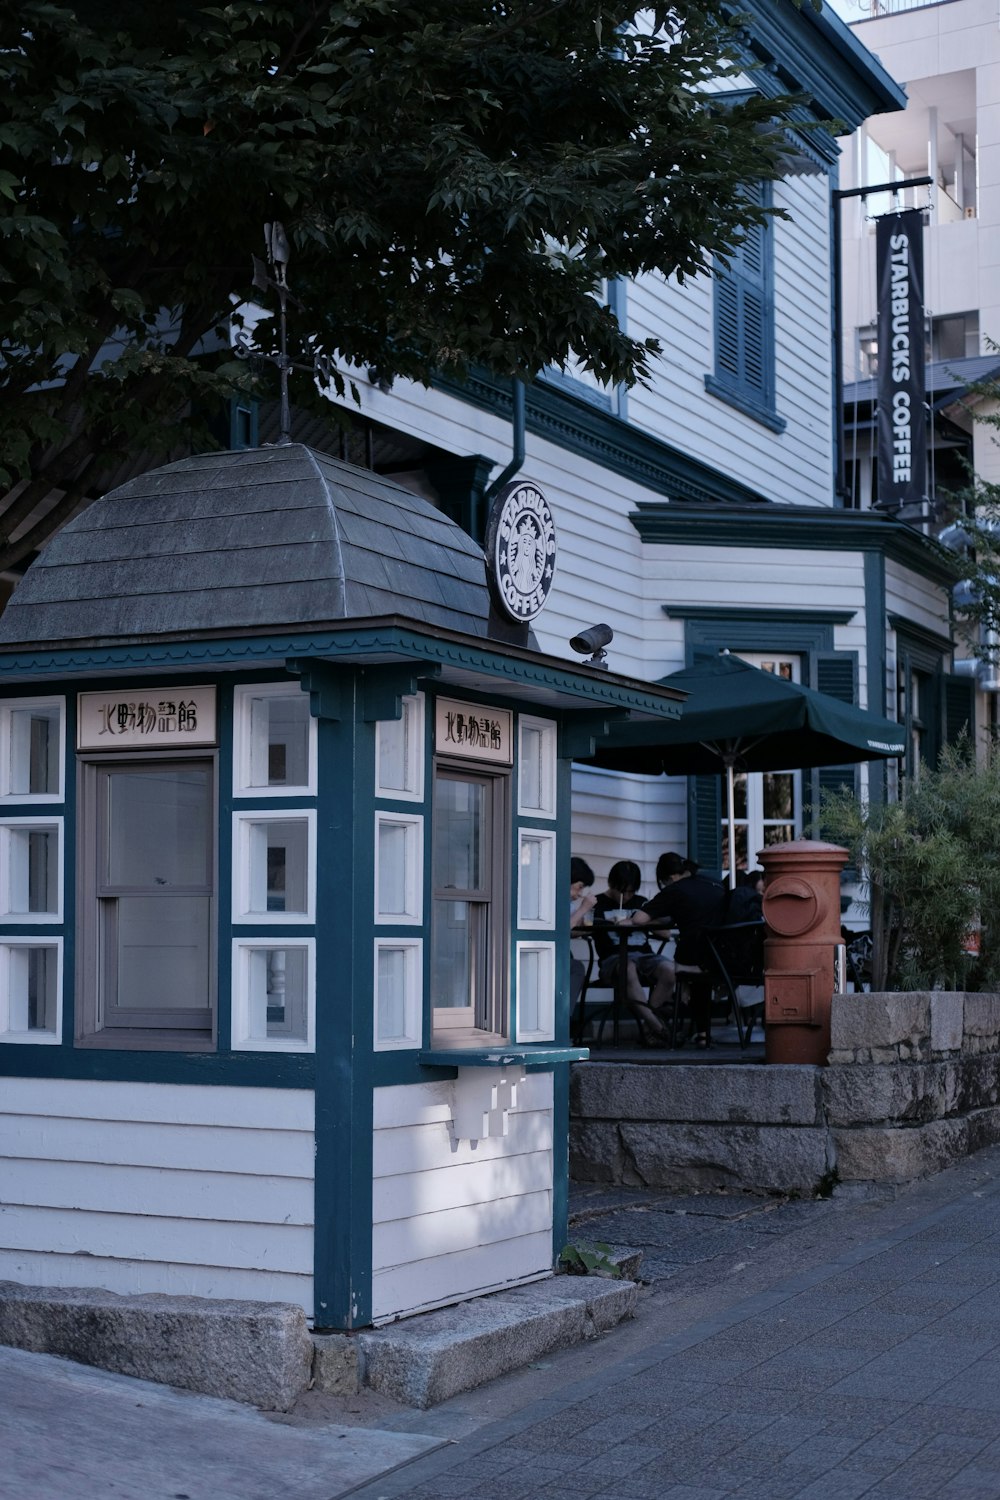 a small cafe with a clock